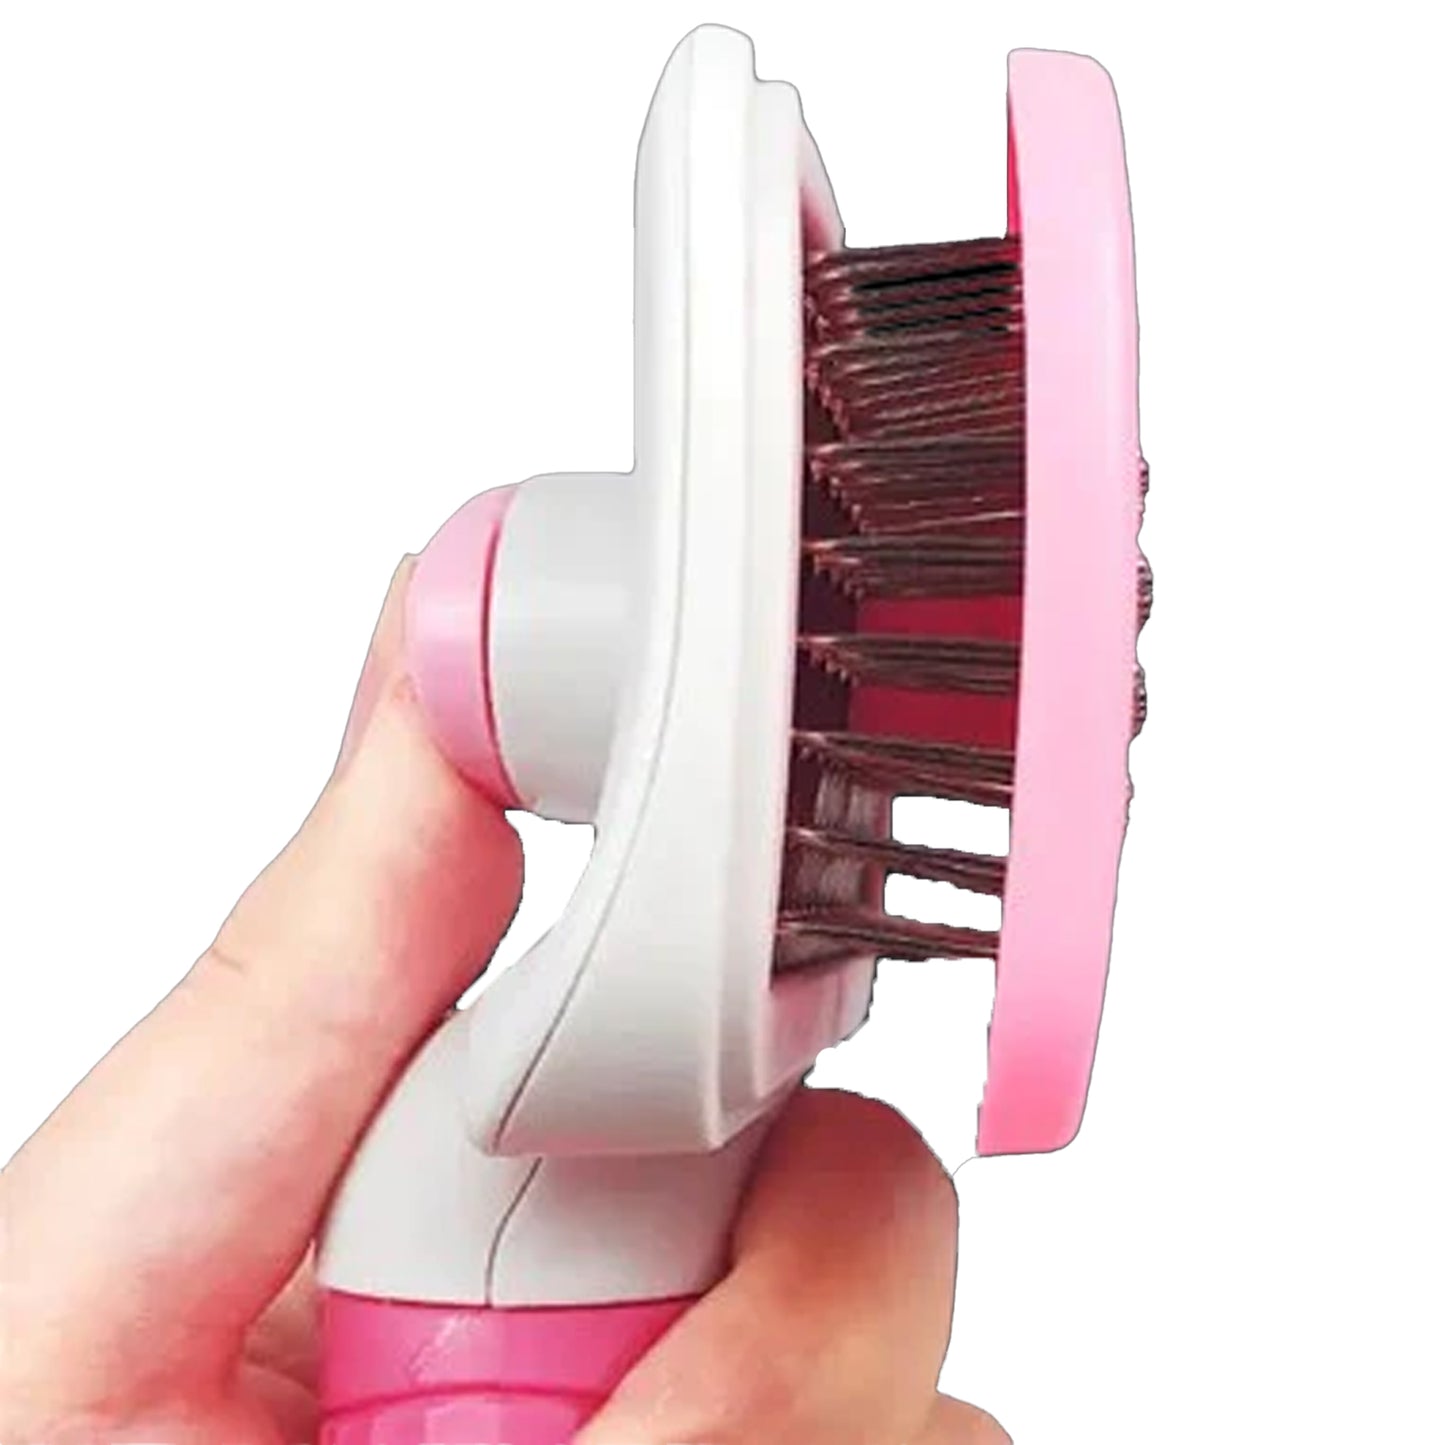 Smarty Pet Push To Clean Sleeker Rectangle Thin Blister Pack Brush